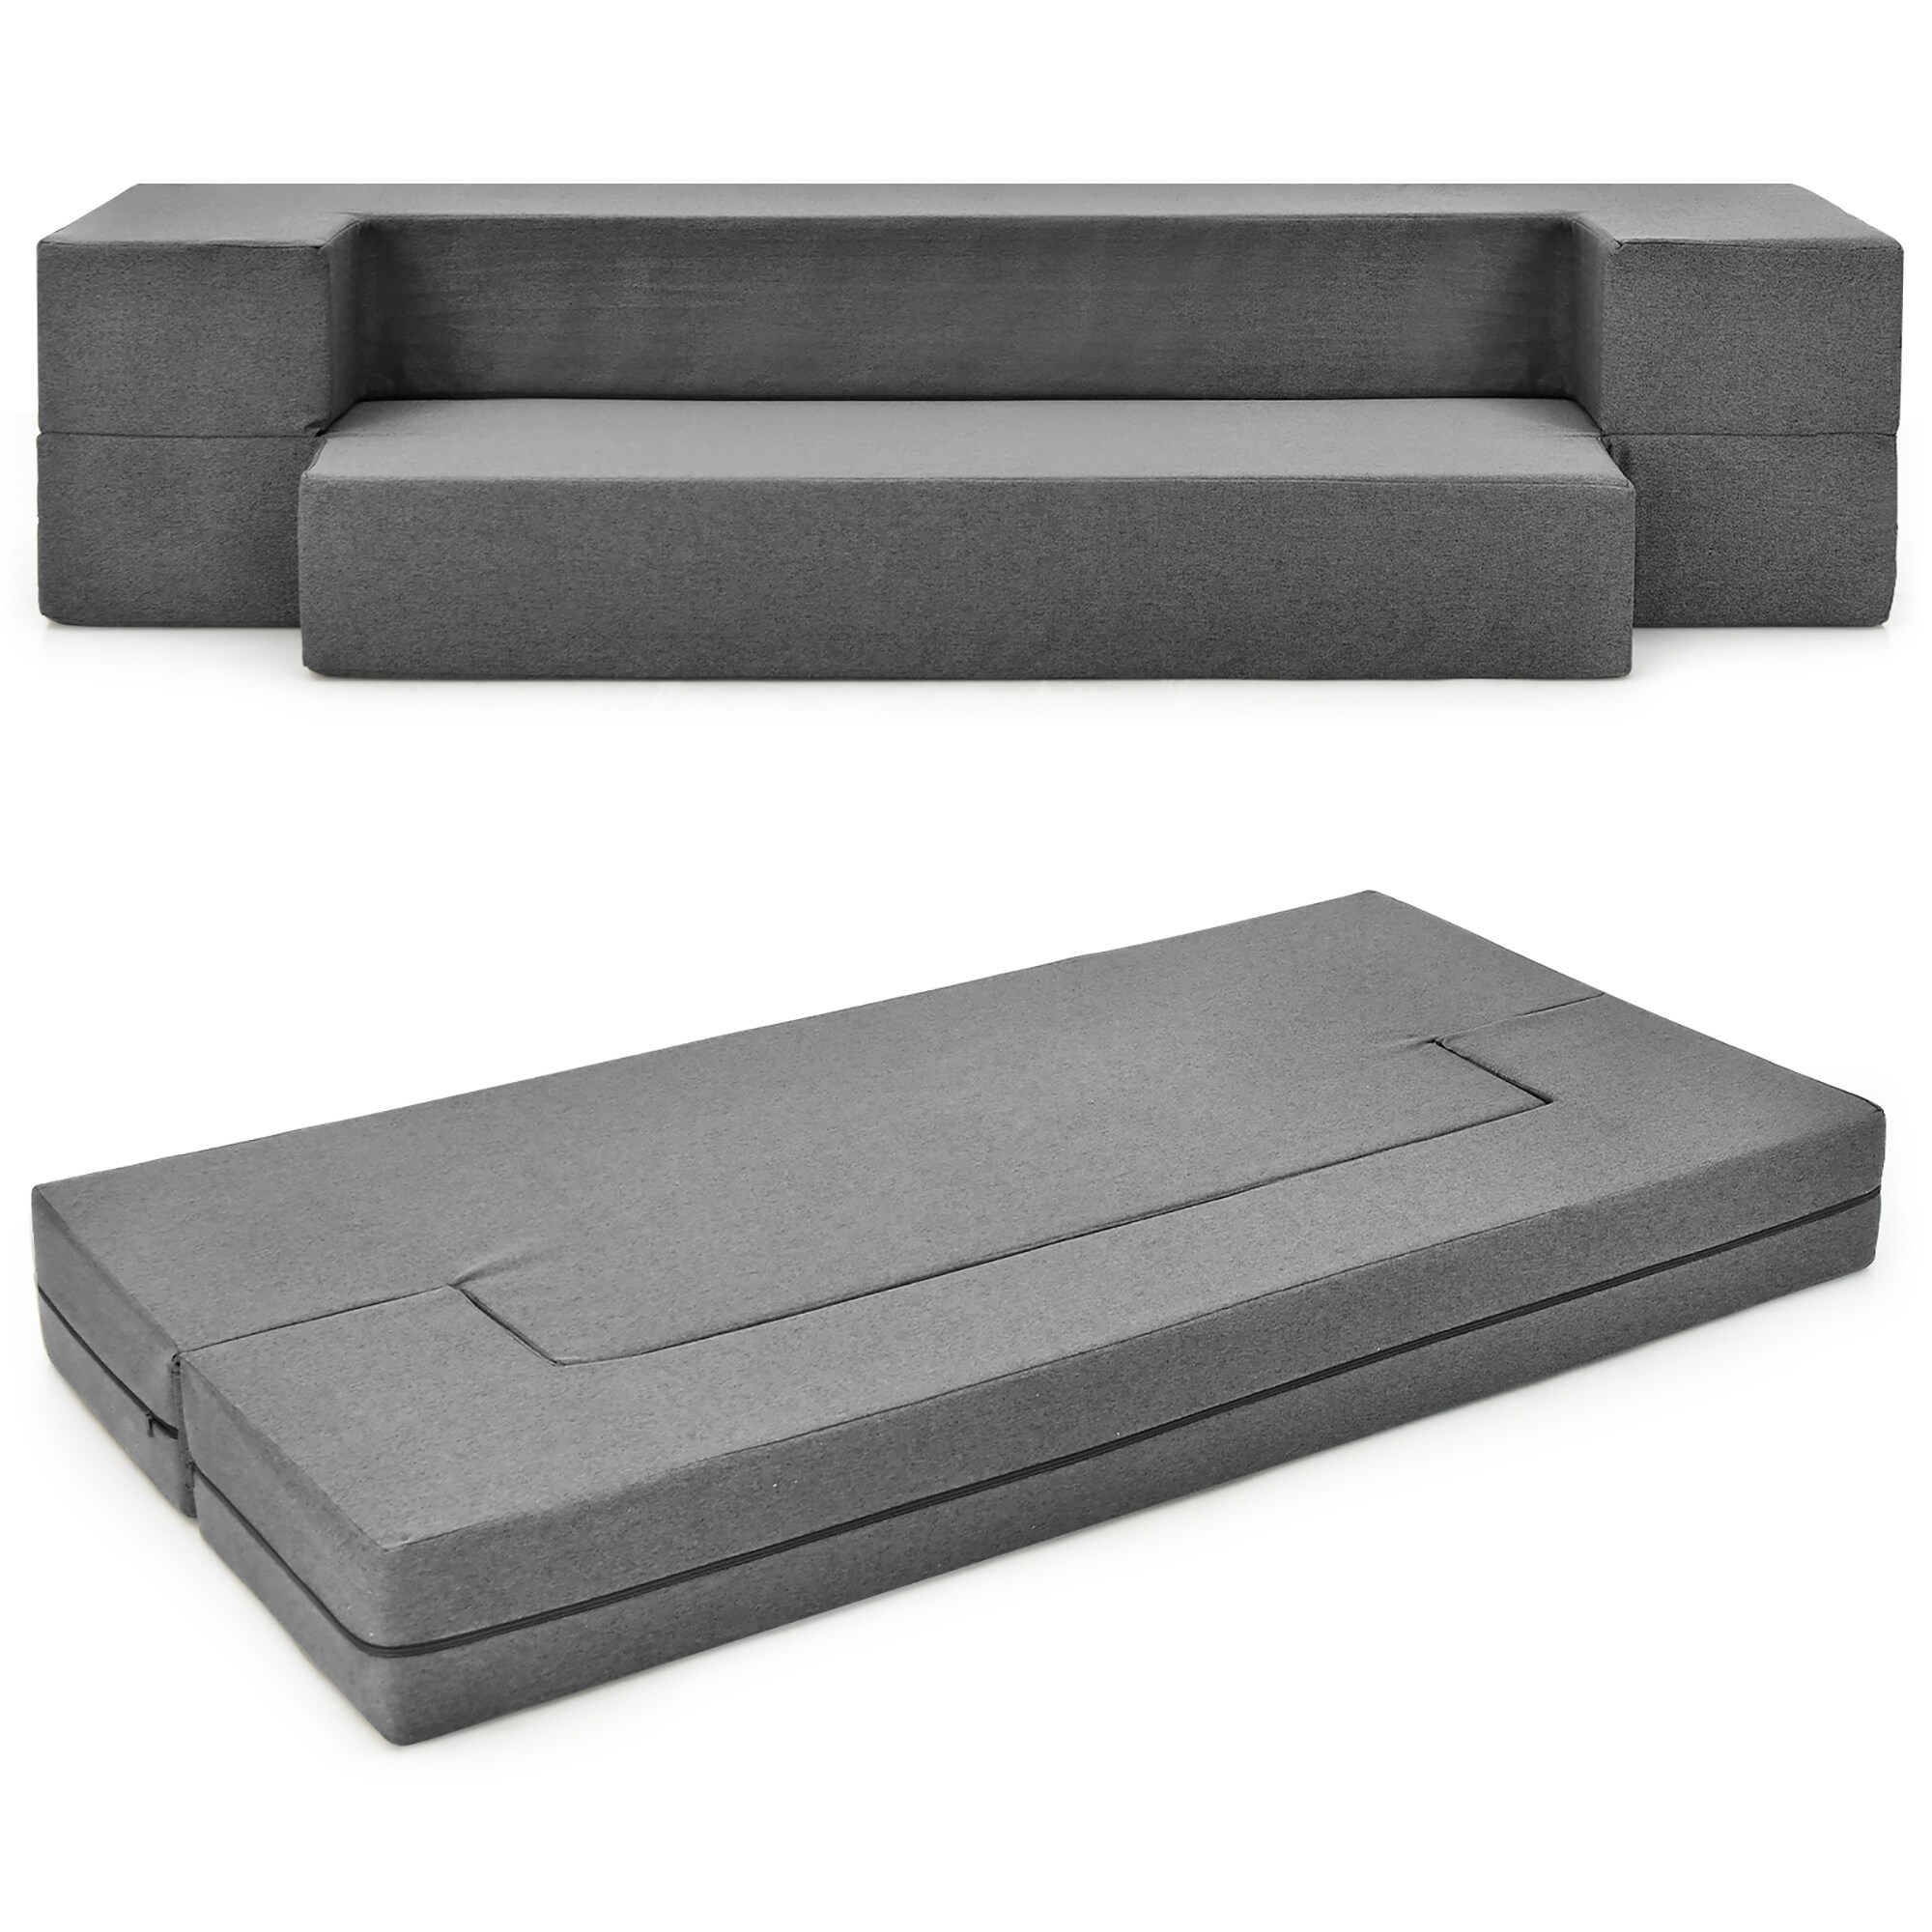 https://ak1.ostkcdn.com/images/products/is/images/direct/a7fa88d4d145f45408c164012221c764723feedb/Costway-8-Inch-Queen-Folding-Sofa-Couch-Bed-Convertible-Floor-Couch.jpg